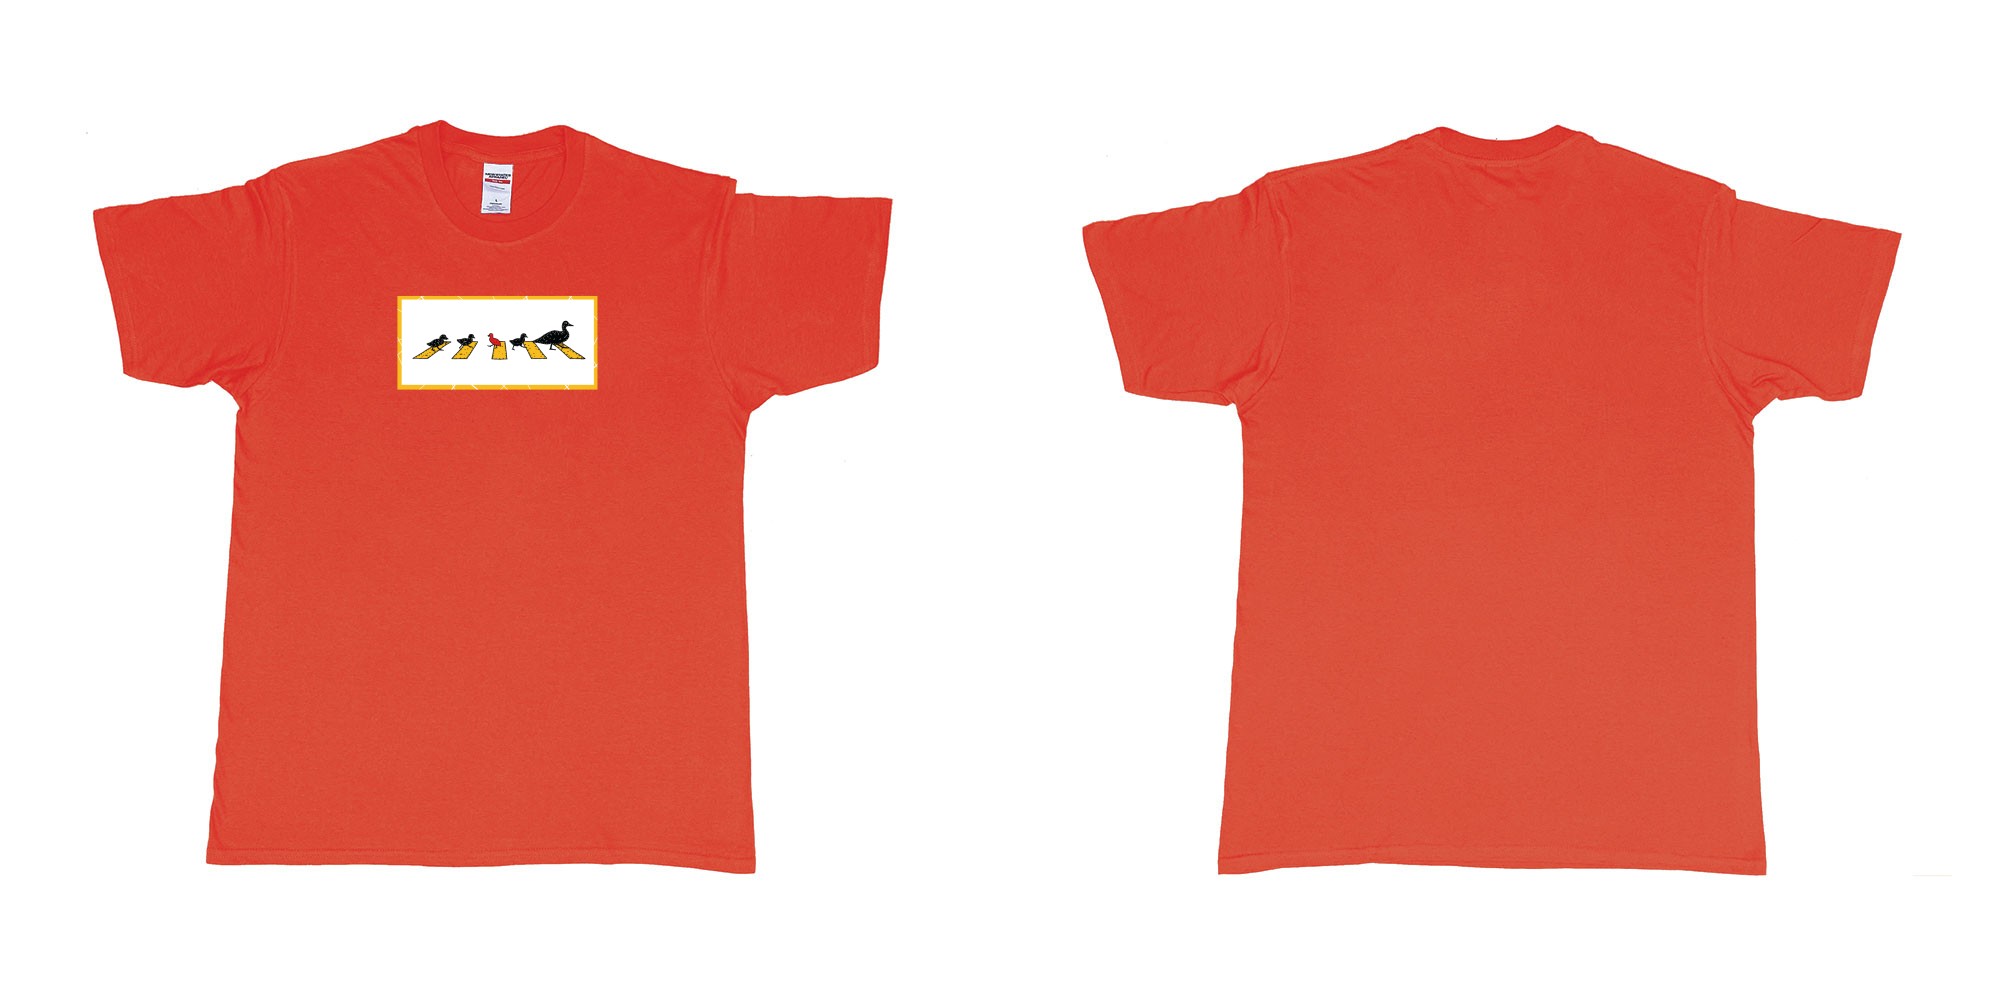 Custom tshirt design 4481 ducks in fabric color red choice your own text made in Bali by The Pirate Way